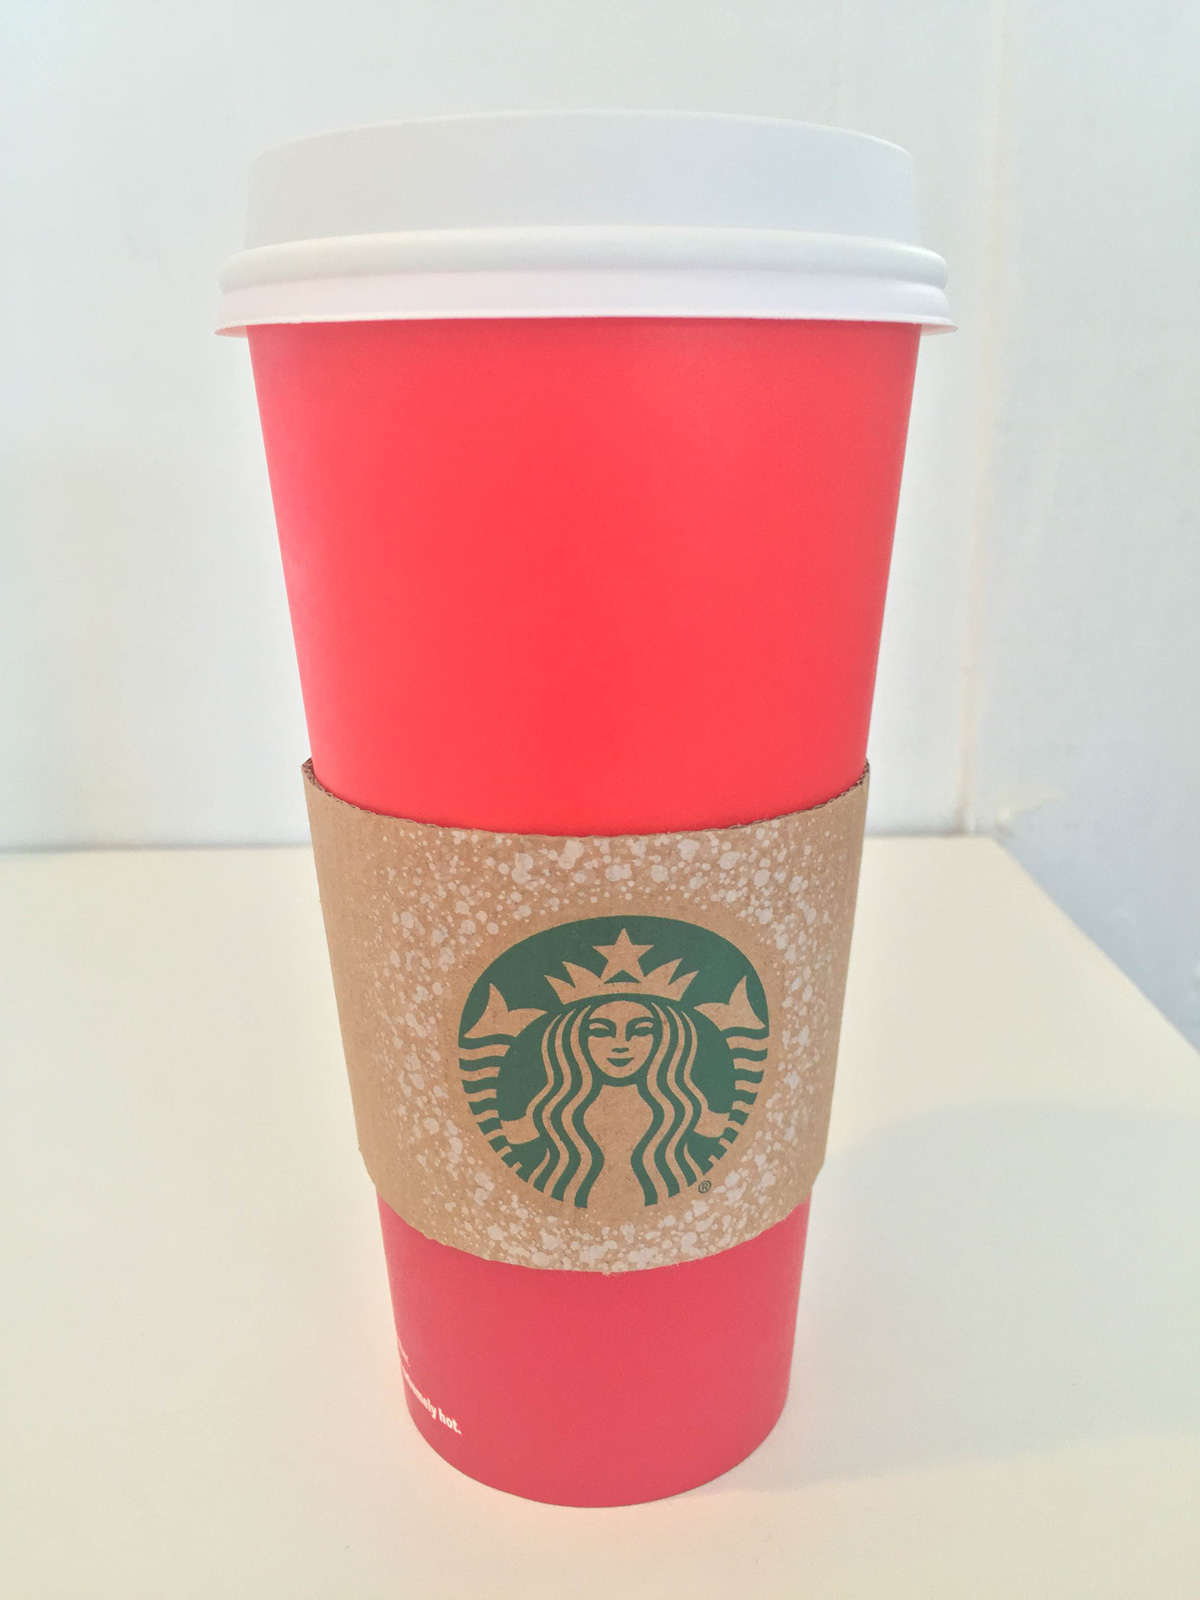 New Starbucks Holiday Cup